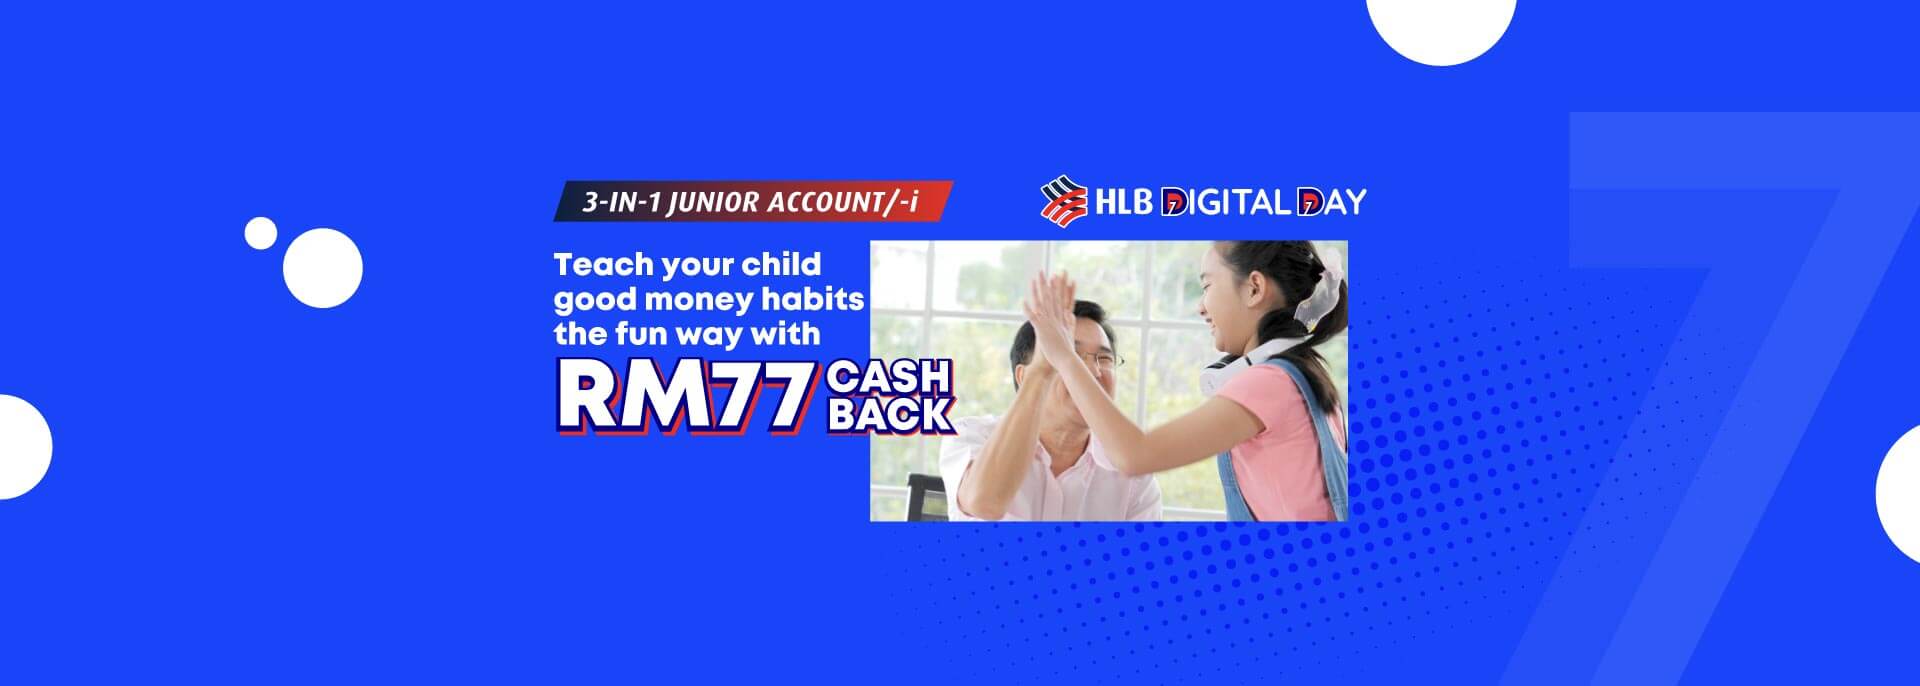 RM77 Cashback for new HLB Pocket Connect users